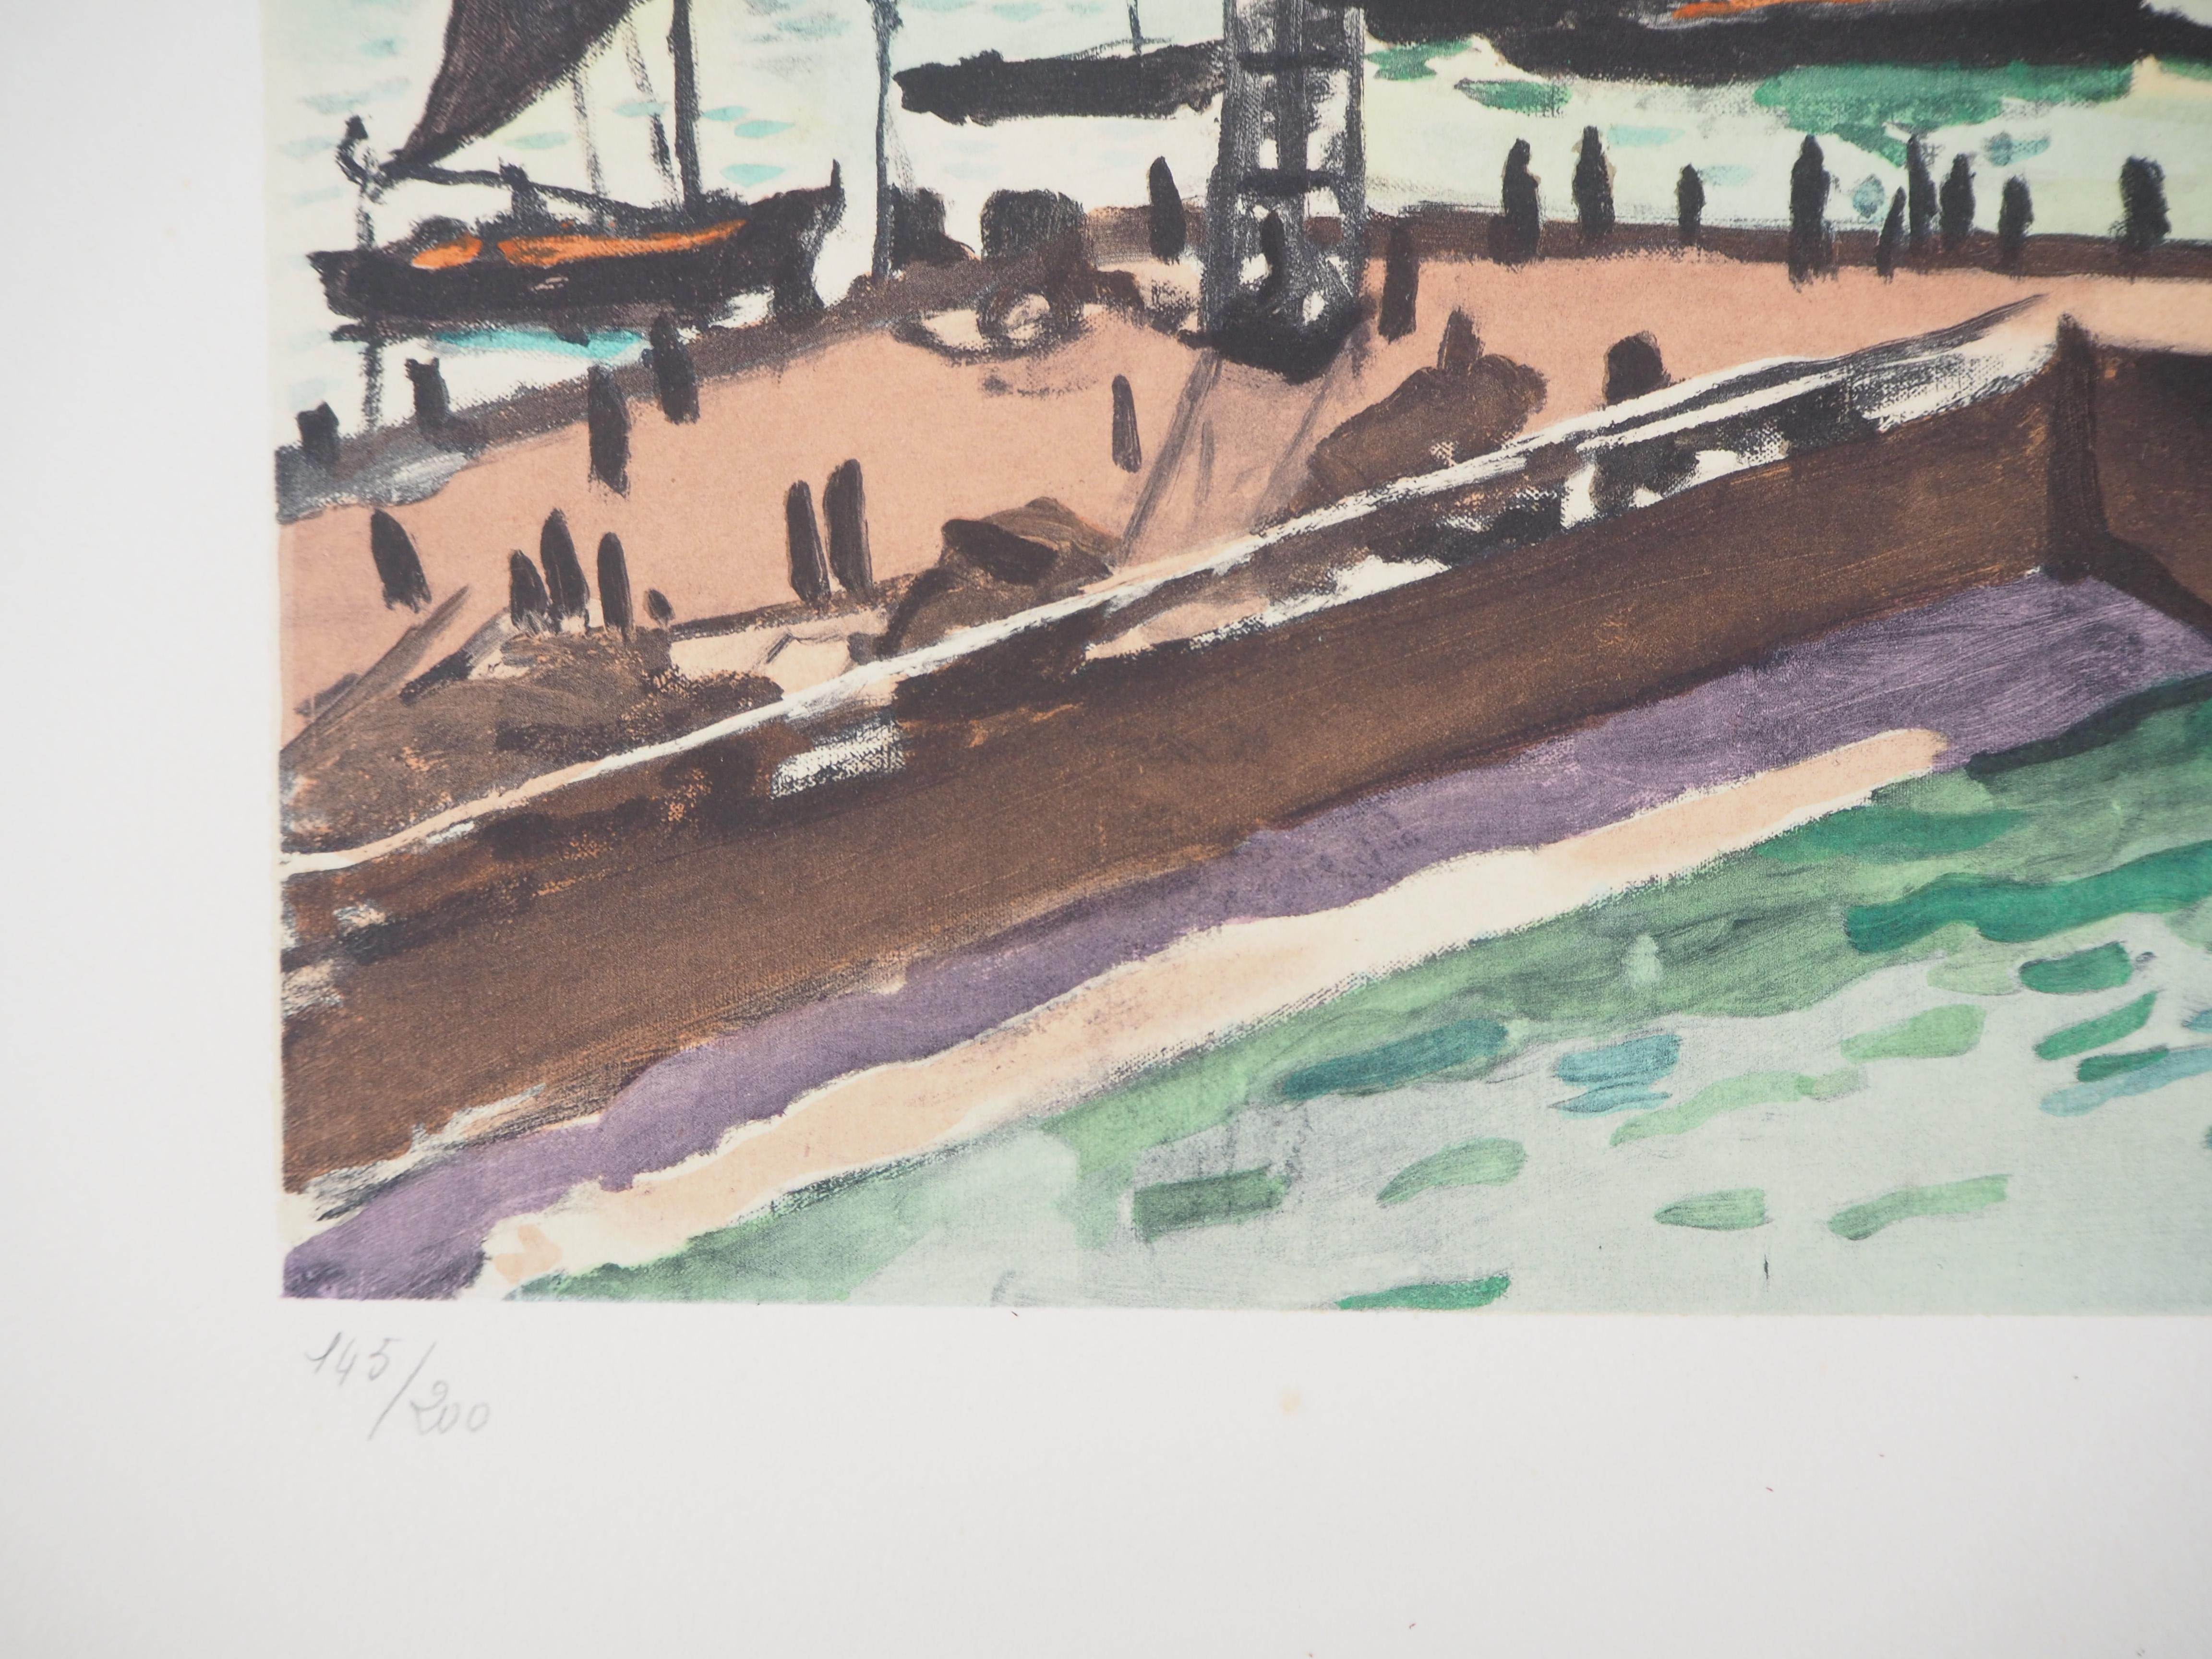 Albert MARQUET
Normandy : Le Havre harbor

Original lithograph
Signed with the artist stamp
Numbered / 200
On Arches vellum 45 x 57 cm (c. 18 x 23 in)

Excellent condition